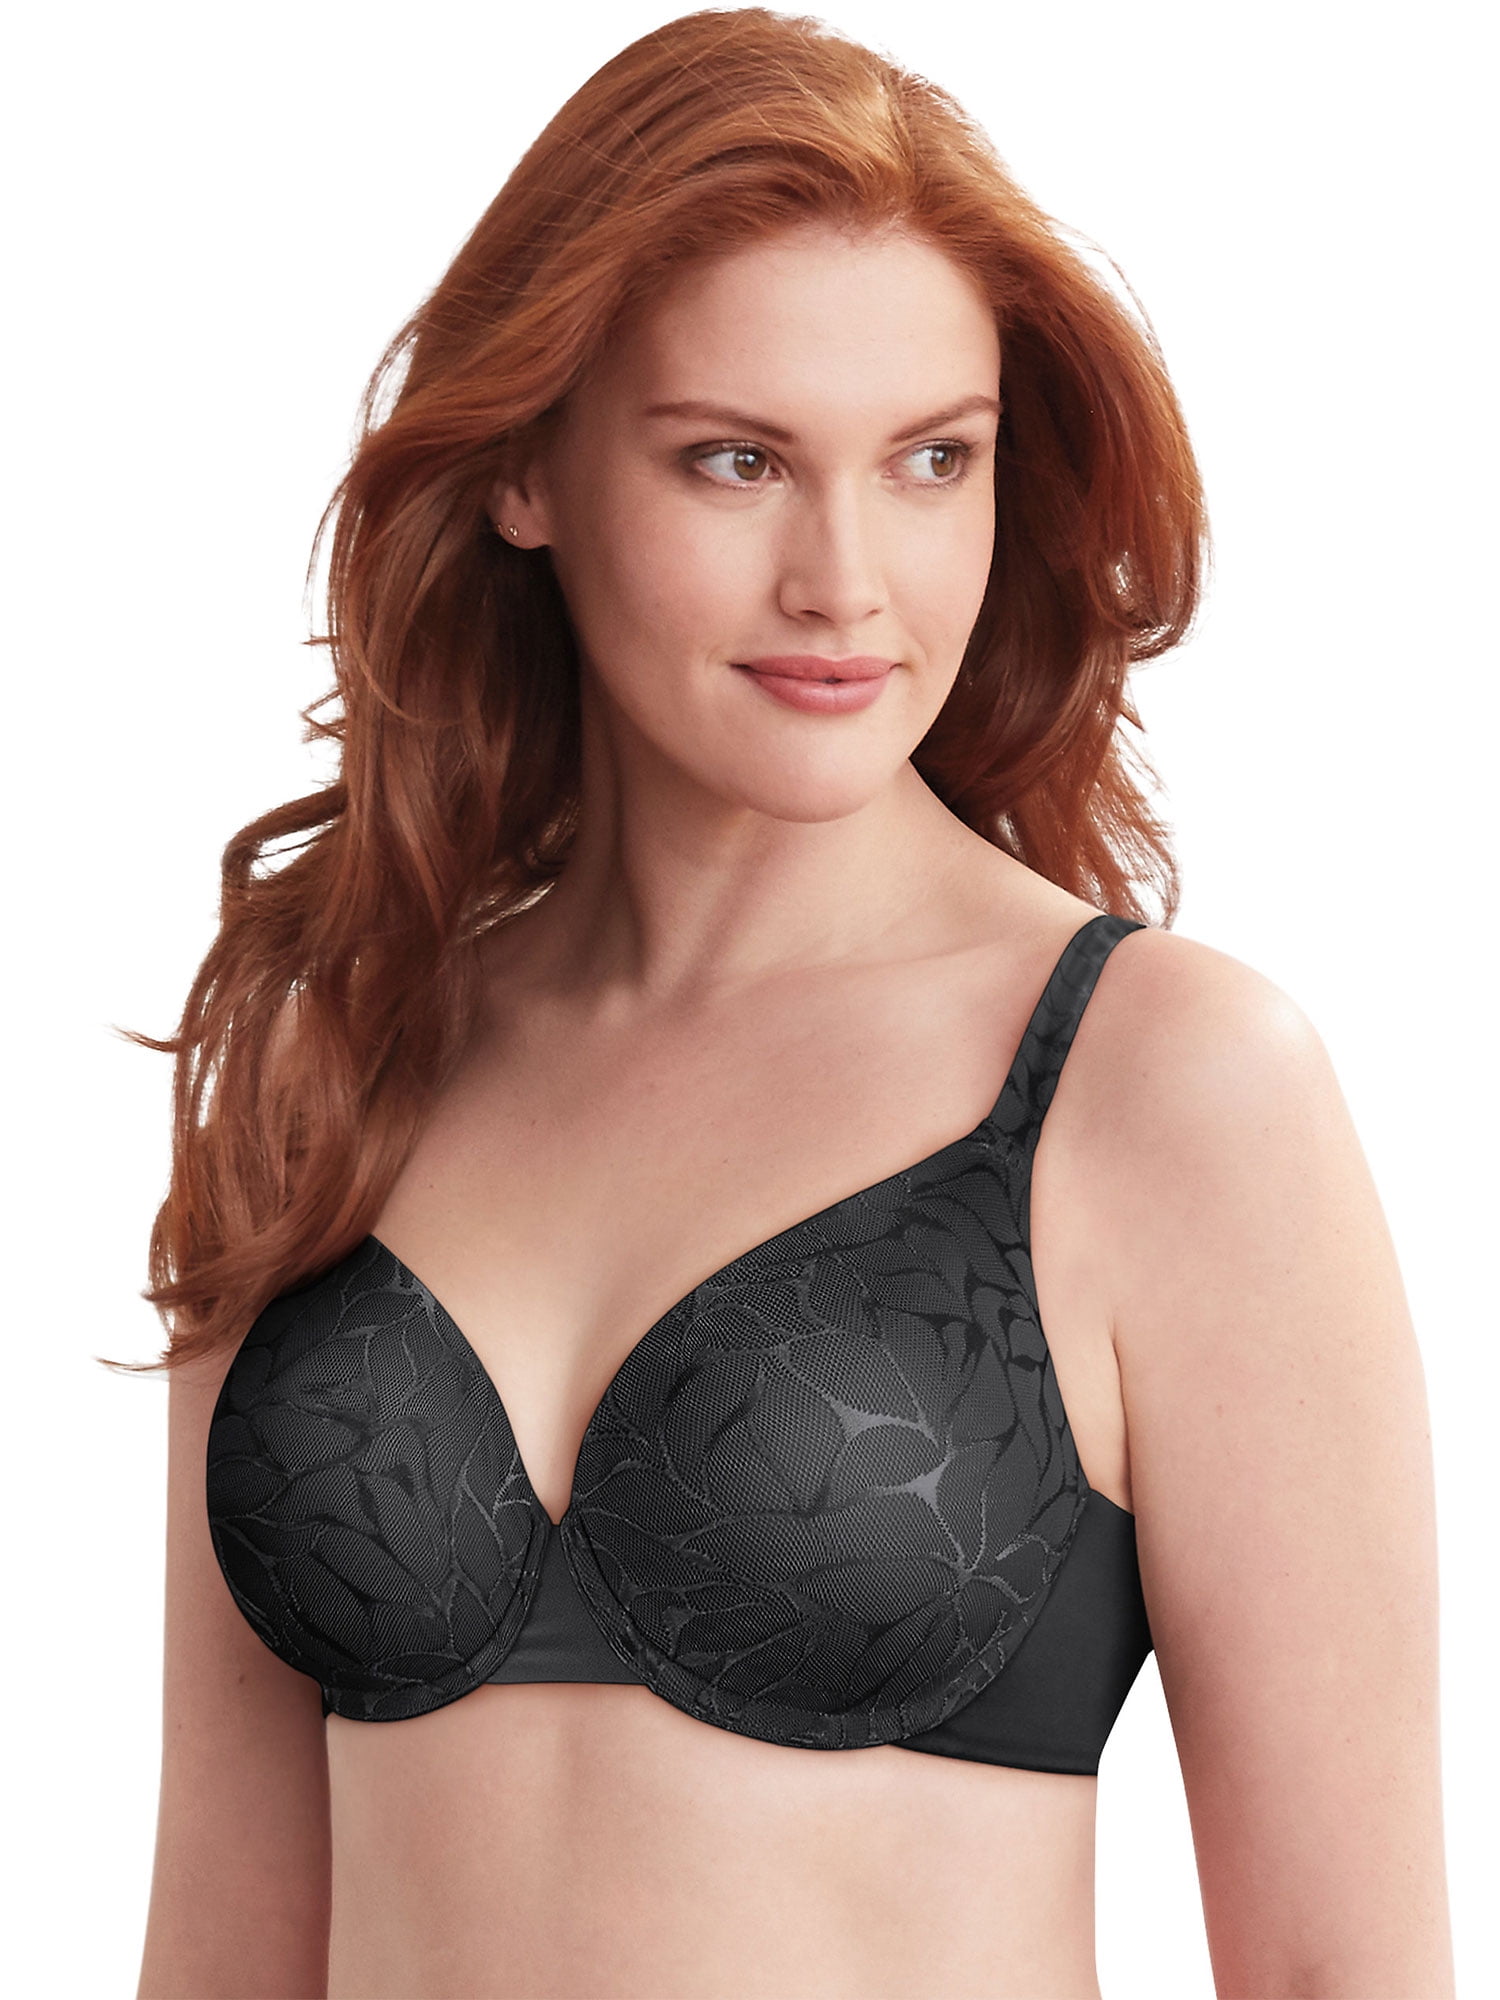 Bali 42 DDD Bra Beauty Lift Invisible Support Underwire Nude 42ddd DF0085  for sale online